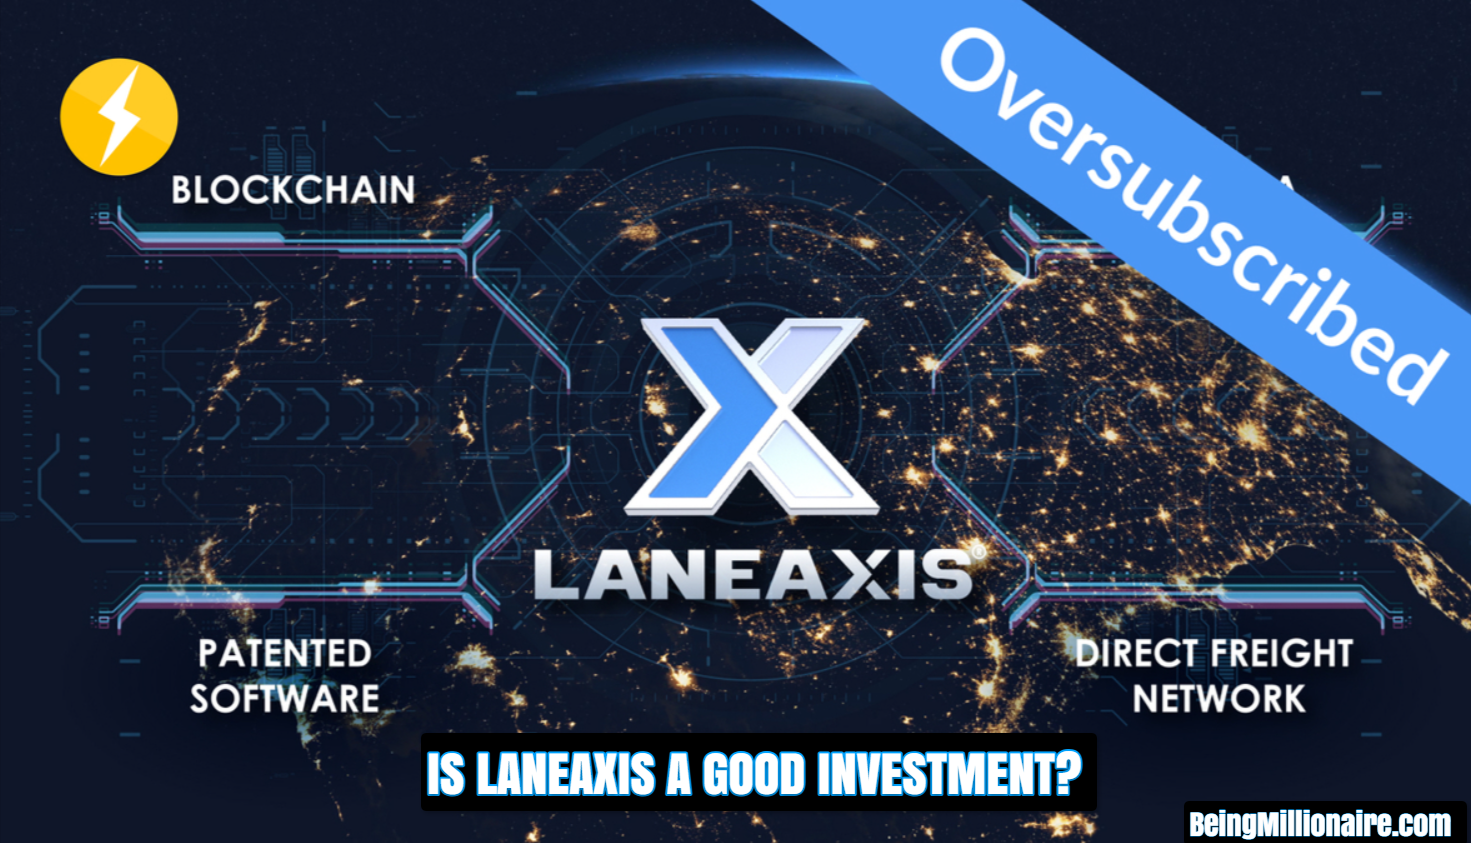 IS LANEAXIS A GOOD INVESTMENT